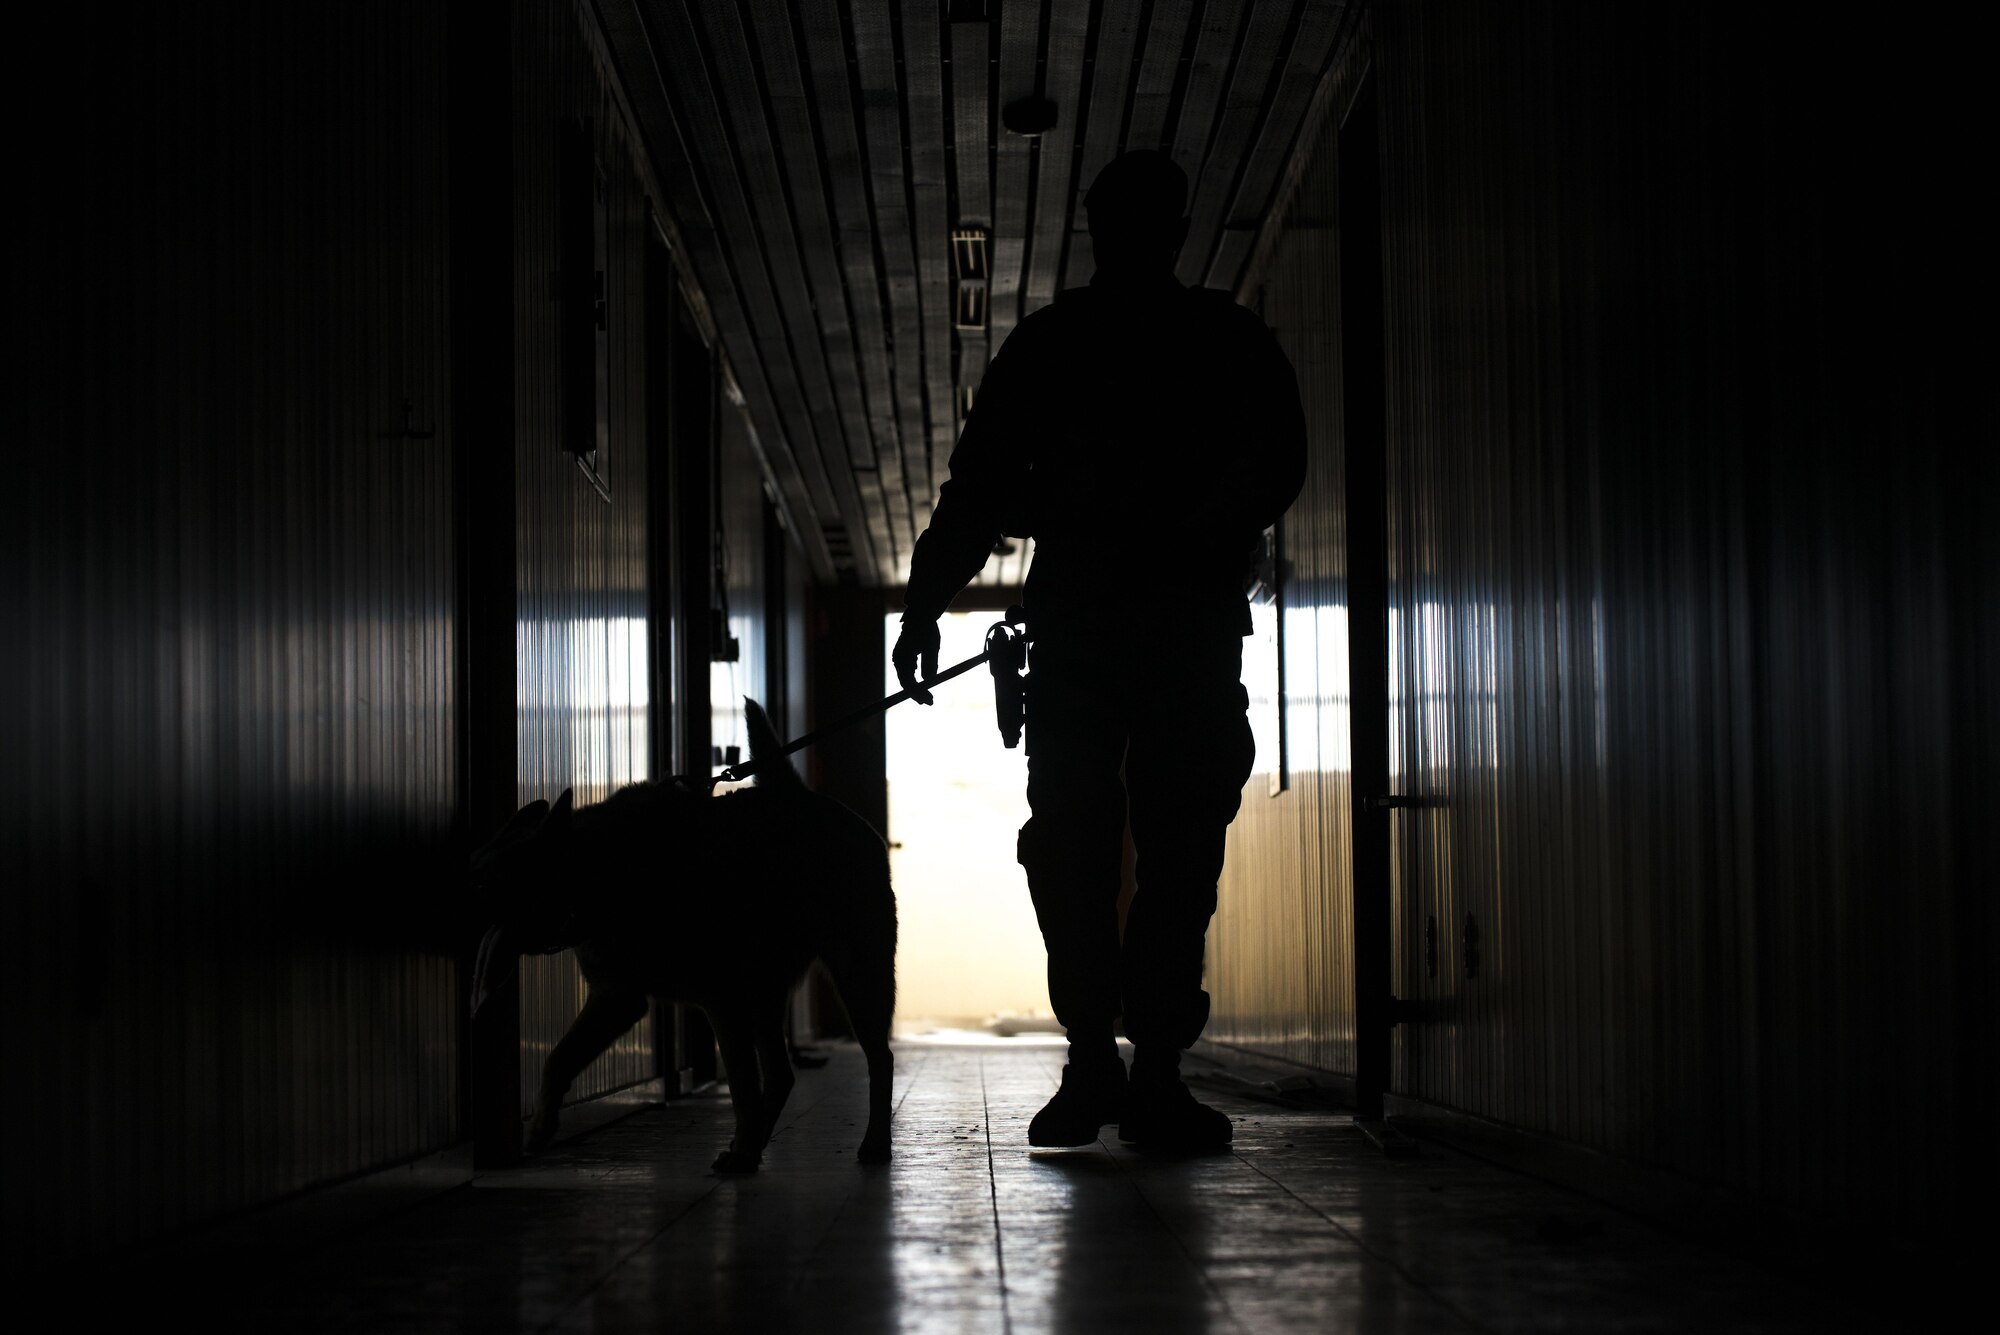 U.S. Air Force Staff. Sgt. Miguel Rodriguez, 39th Security Forces Squadron military working dog (MWD) handler, and Rambo, search a building for simulated substances during detection training, Mar. 2, 2017, at Incirlik Air Base, Turkey. Different MWD’s are trained to scout and detect various substances the enemy may employ. (U.S. Air Force photo by Senior Airman John Nieves Camacho)